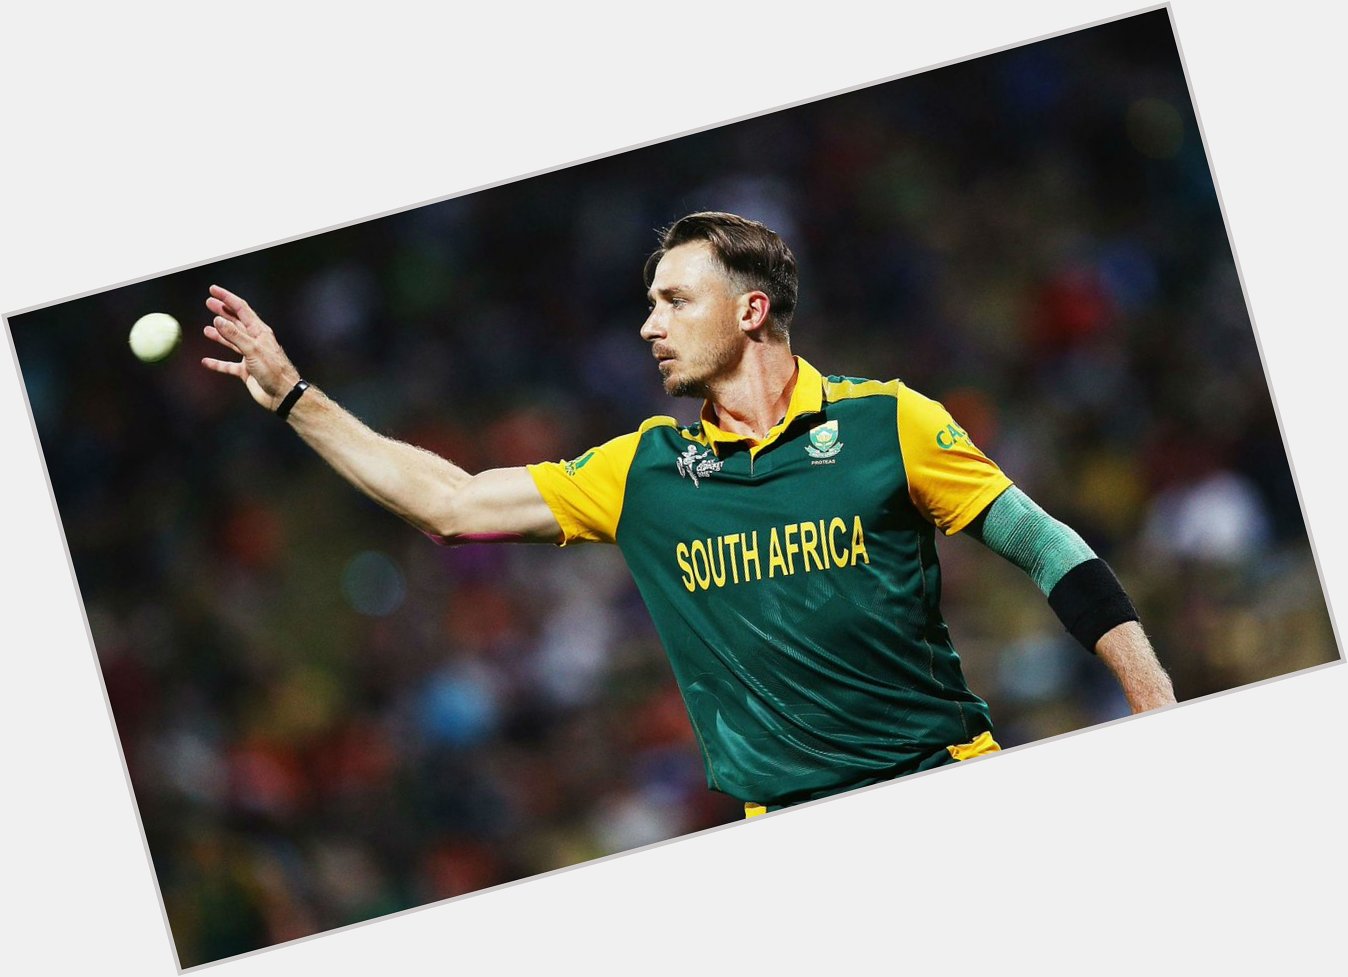  Dale_Steyn .an breath taking bowler     .
an amazing photographer too... 